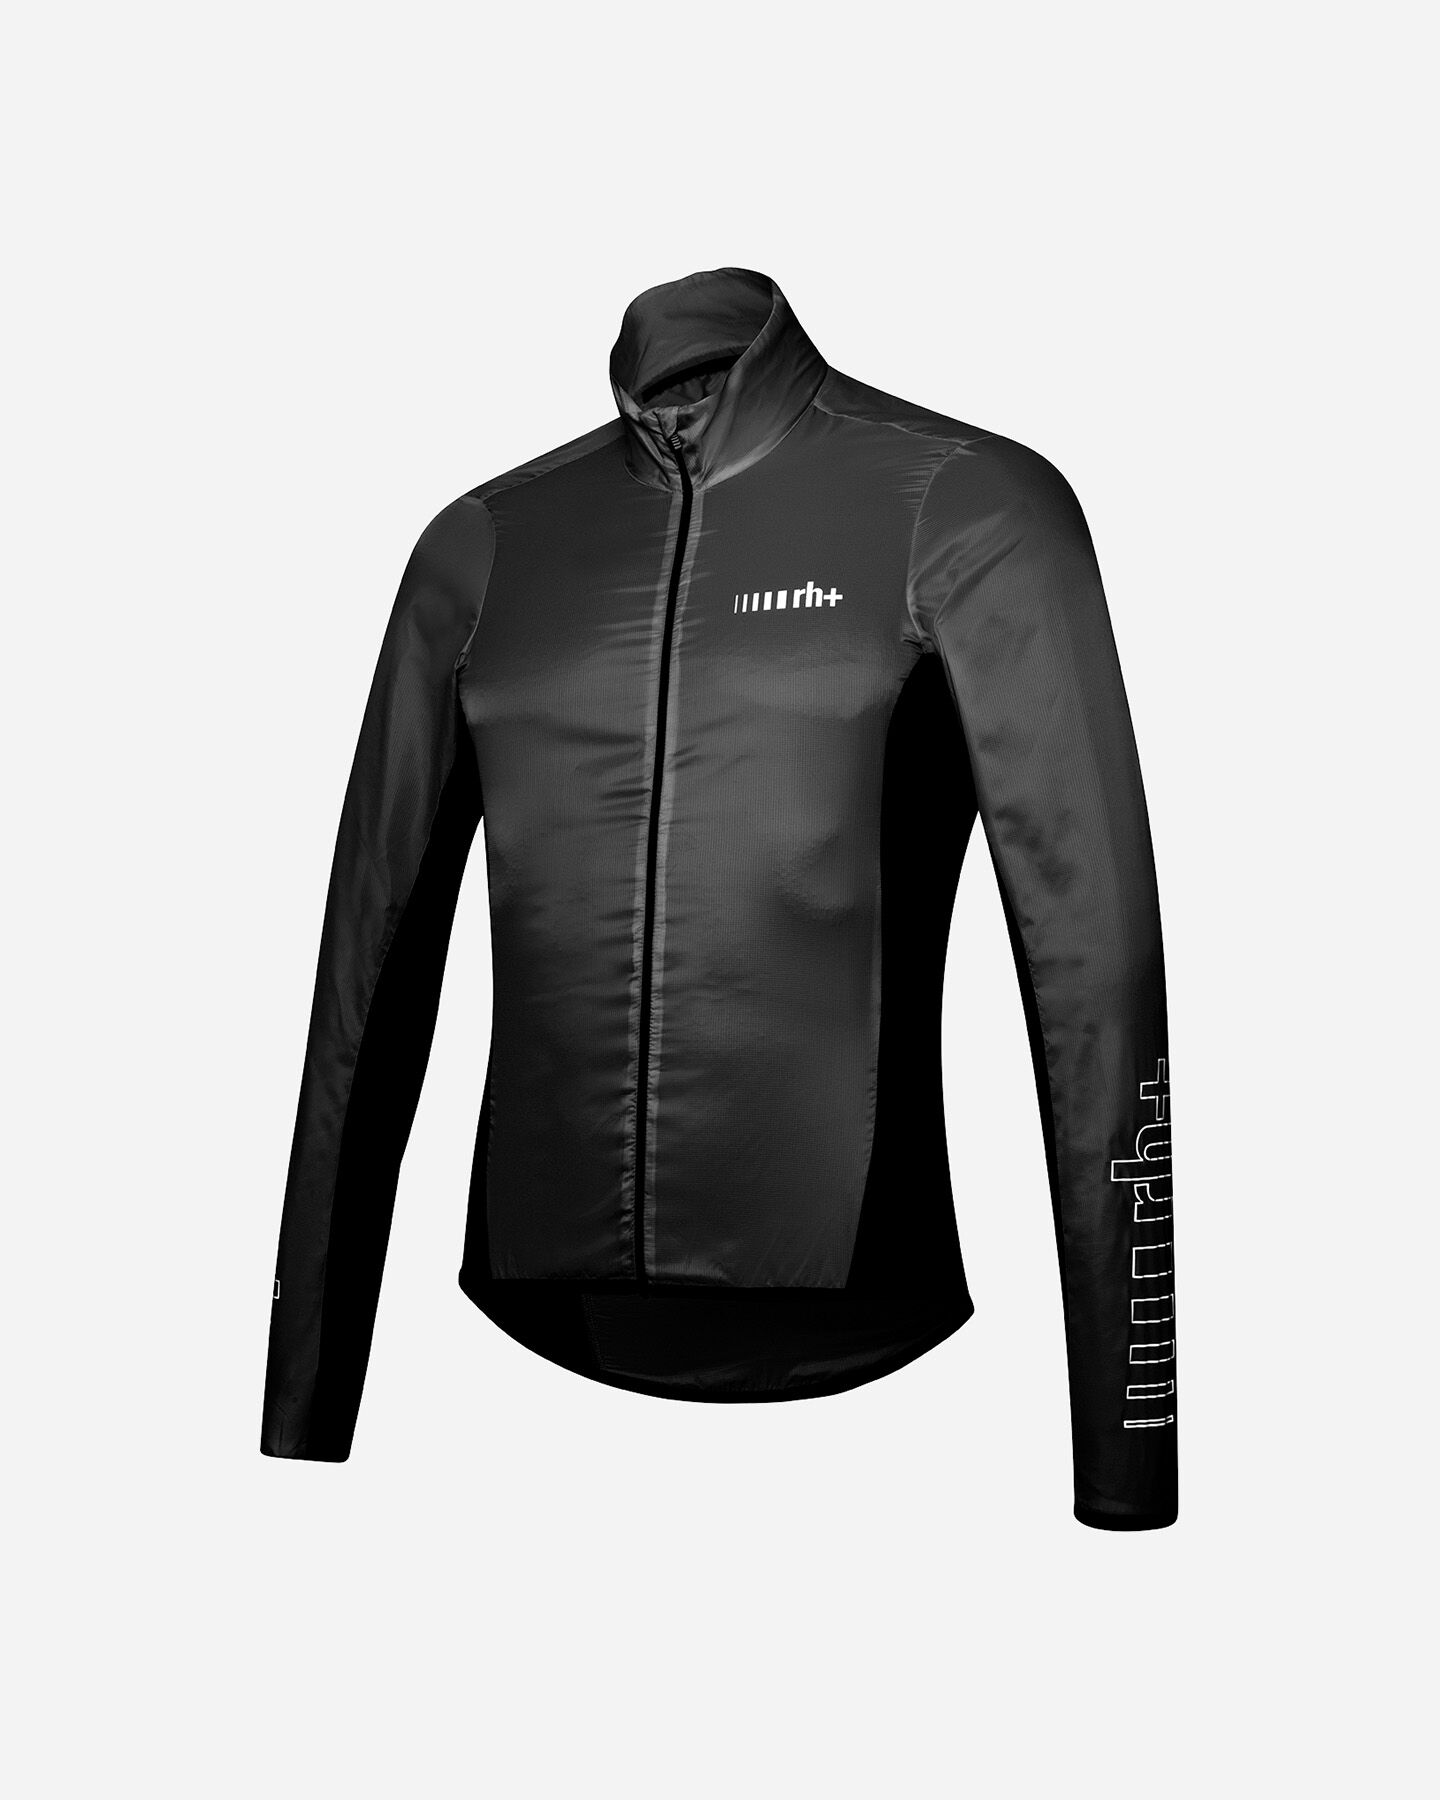  Giacca ciclismo RH+ EMERGENCY POCKET M S4128156|1|L scatto 0